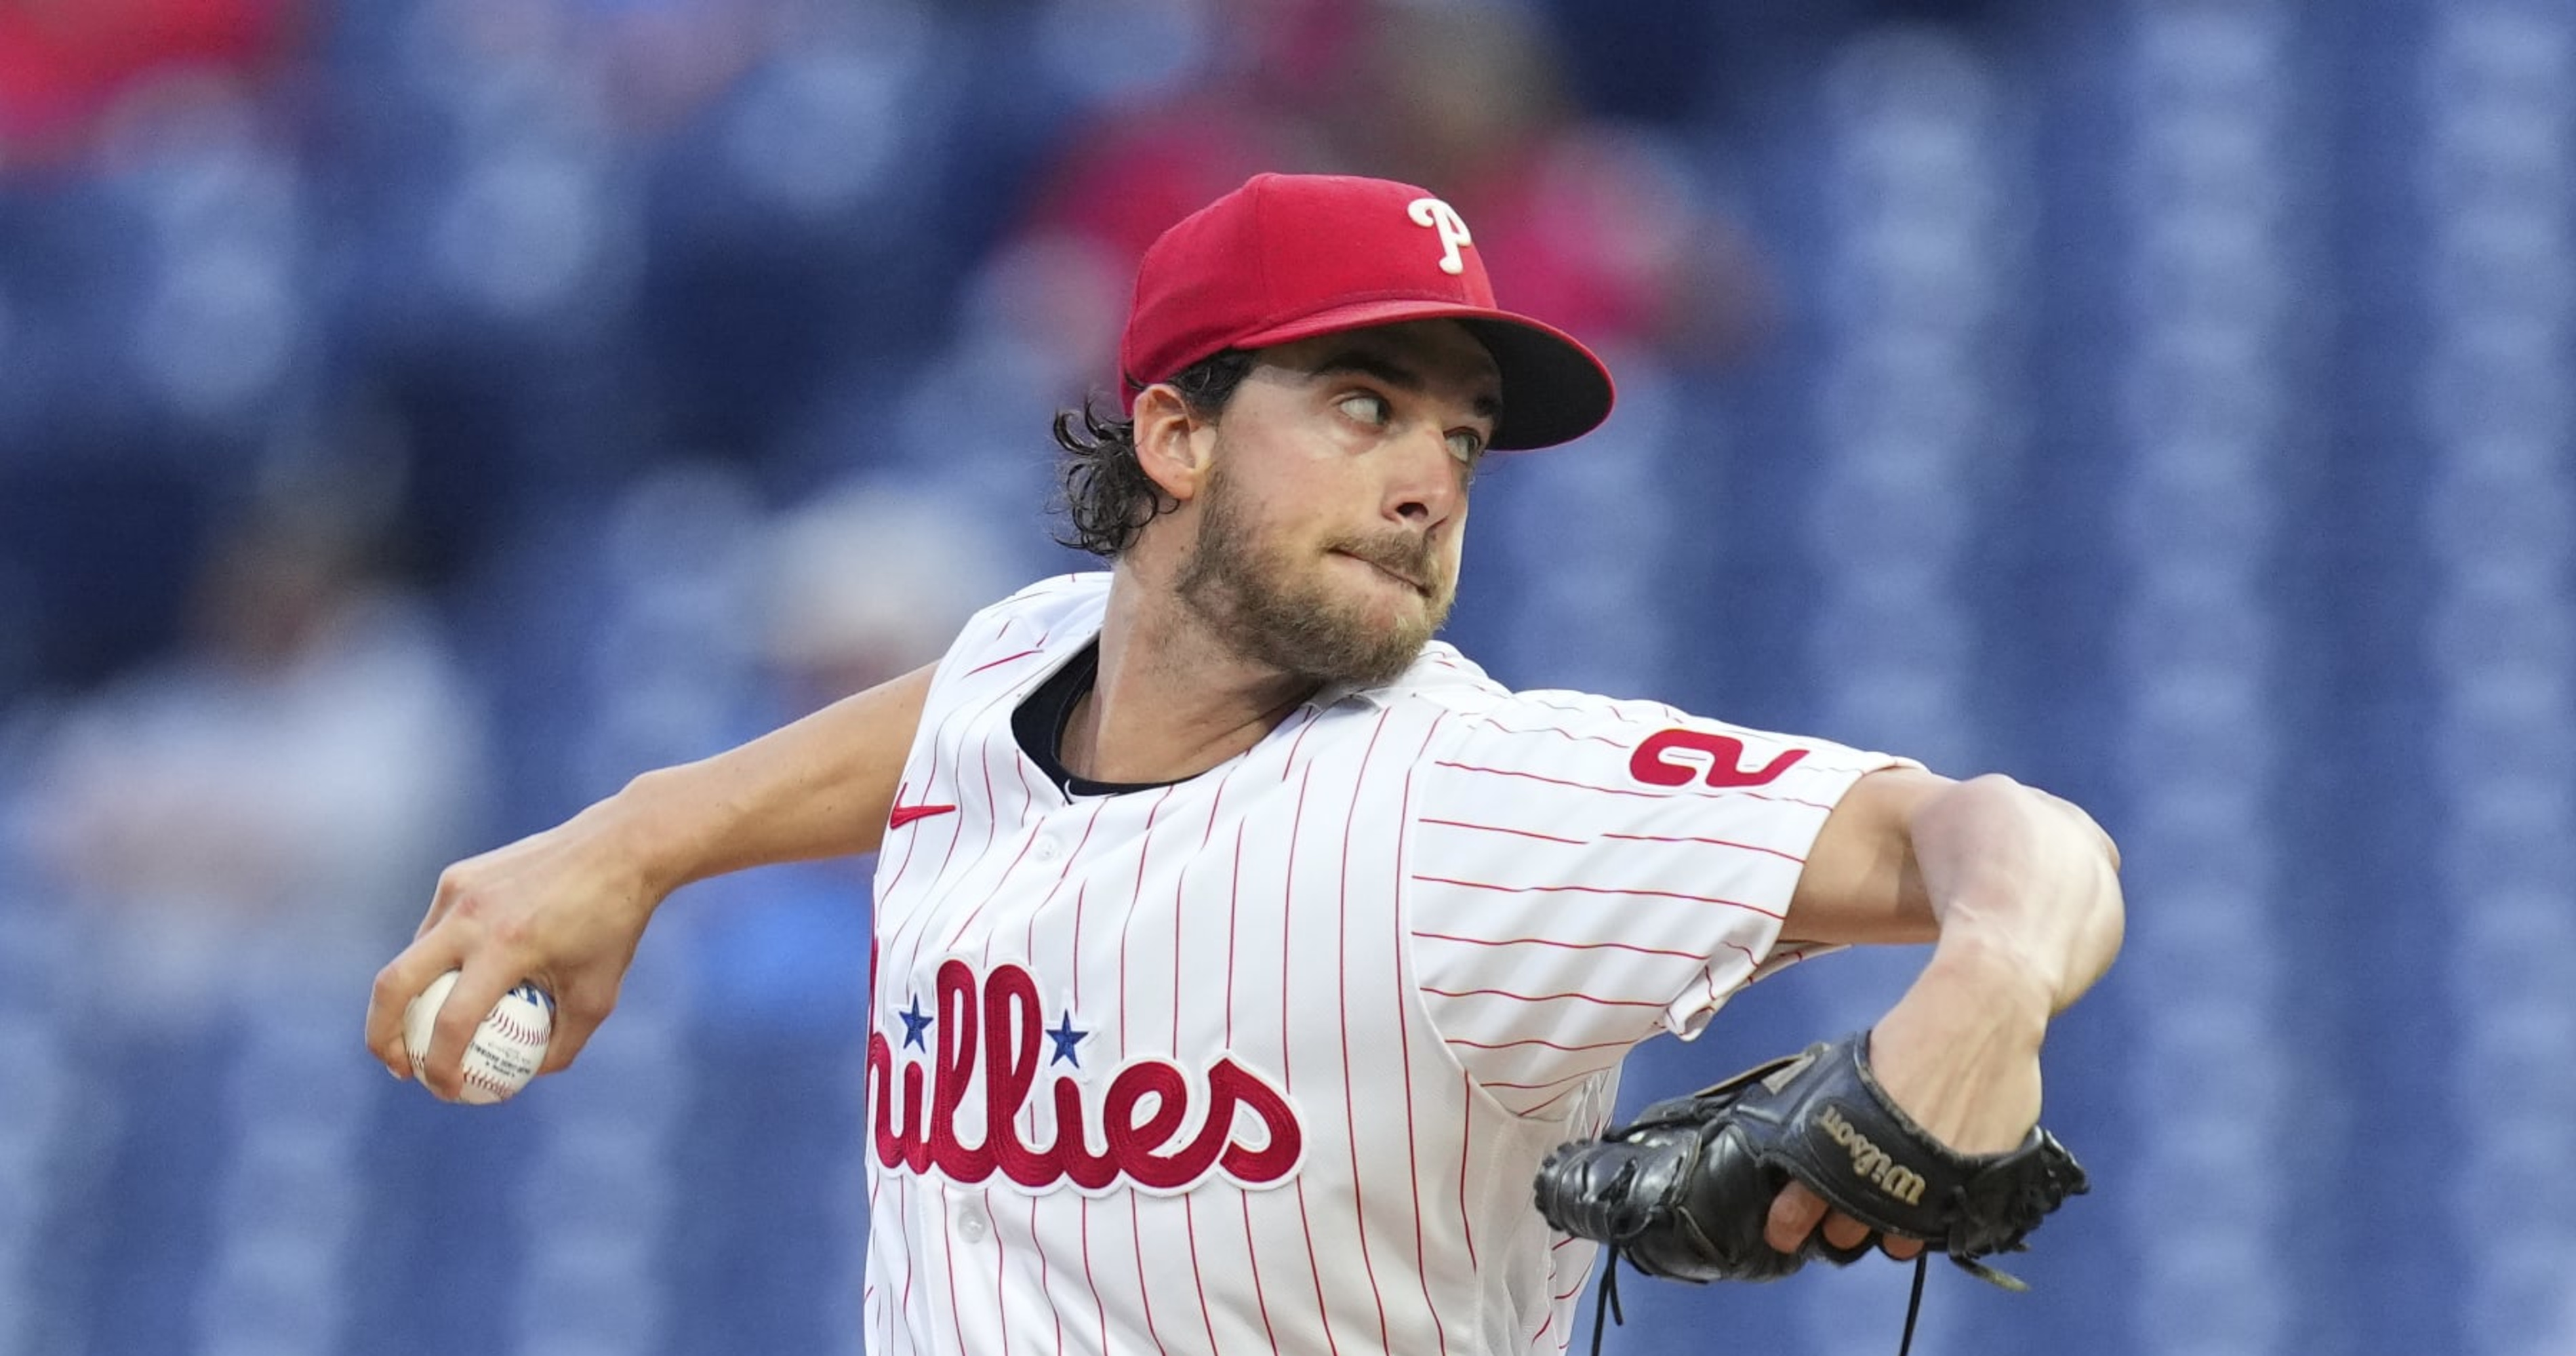 Report: Phillies exercise $16M club option on Aaron Nola for 2023